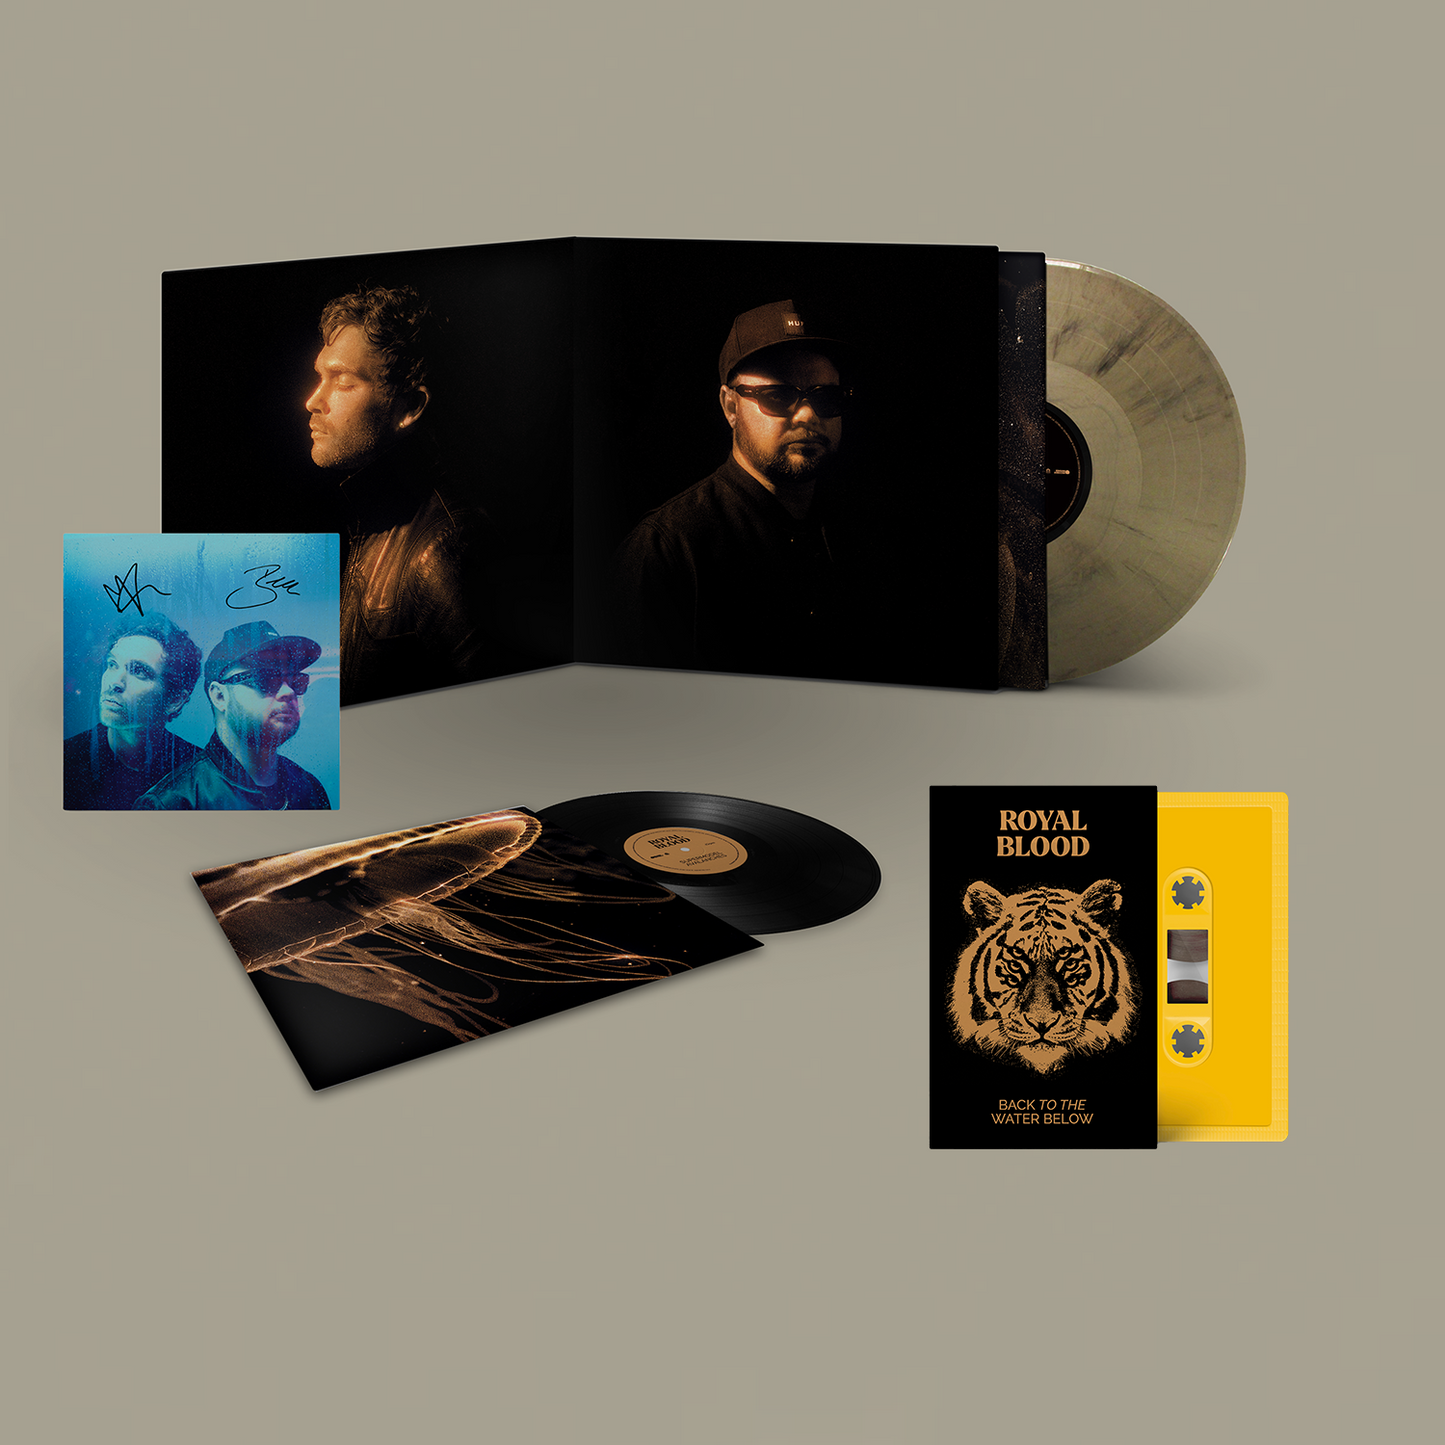 Back To The Water Below Deluxe LP [Signed Insert] & Cassette Bundle